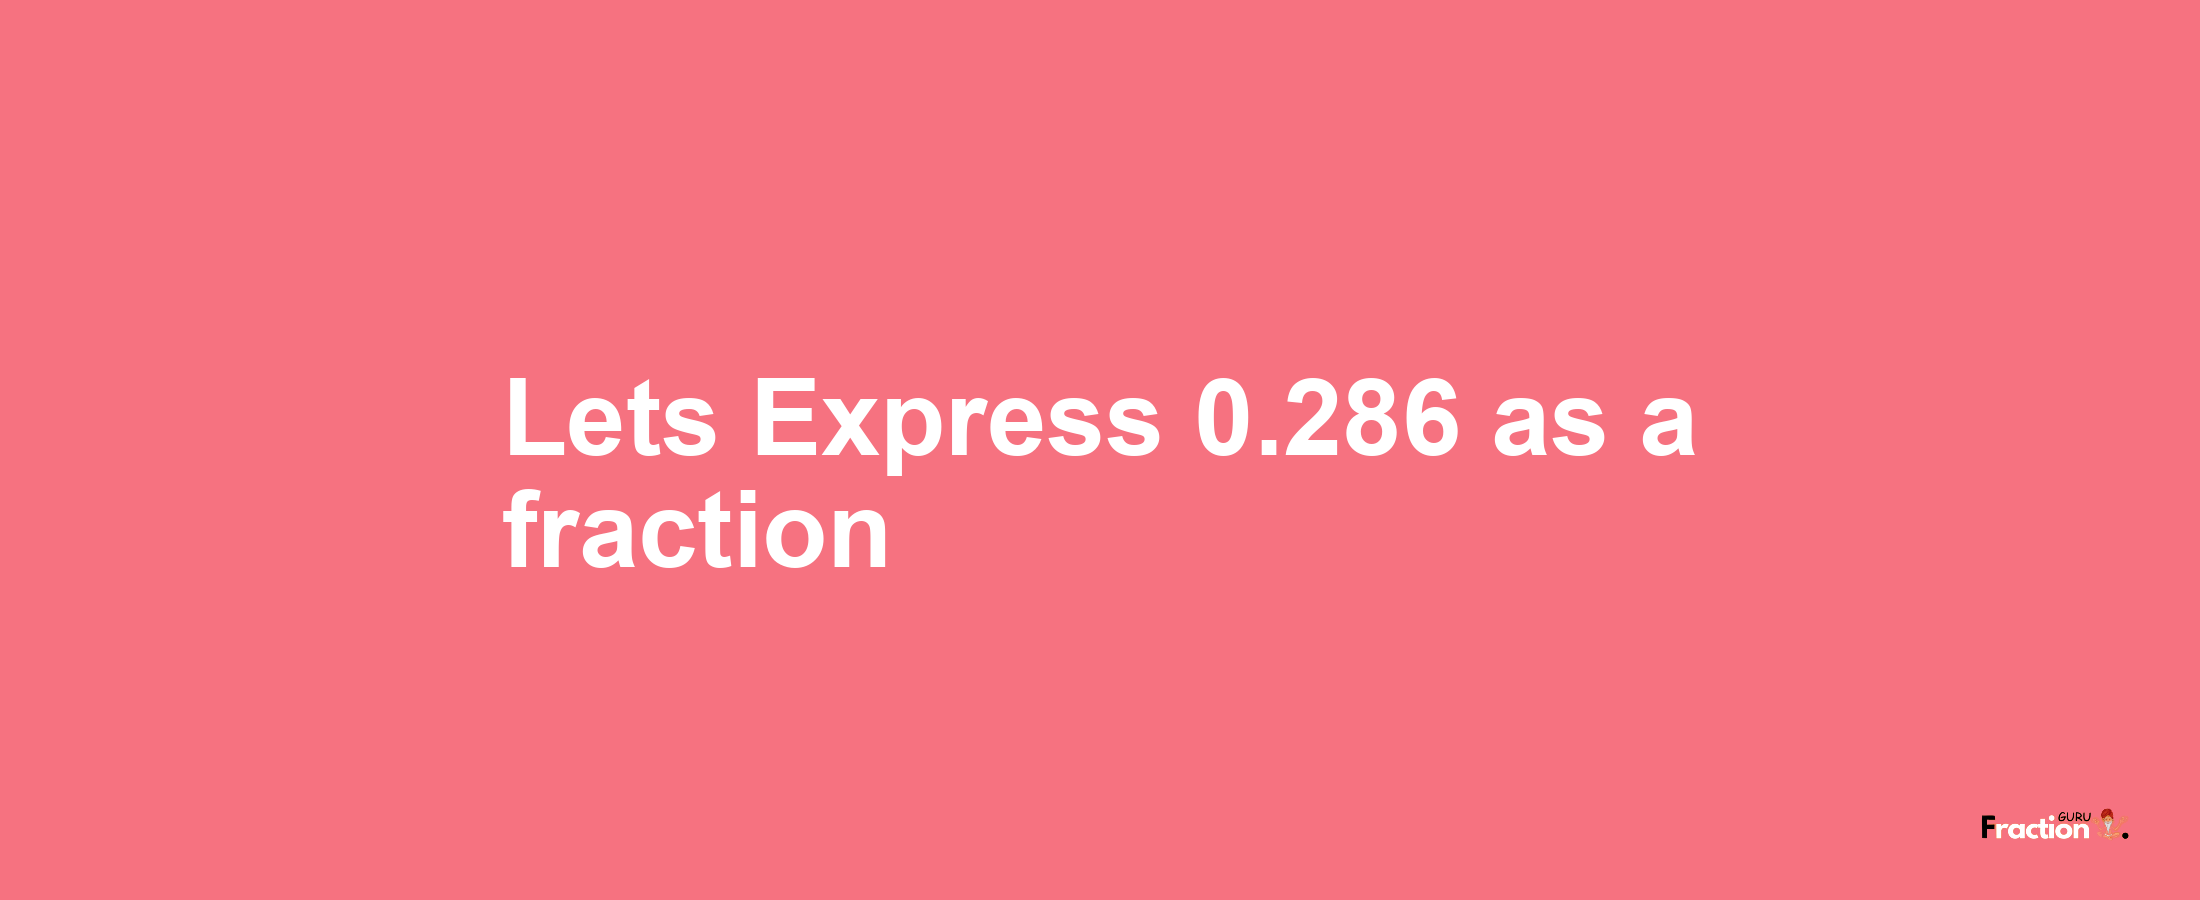 Lets Express 0.286 as afraction